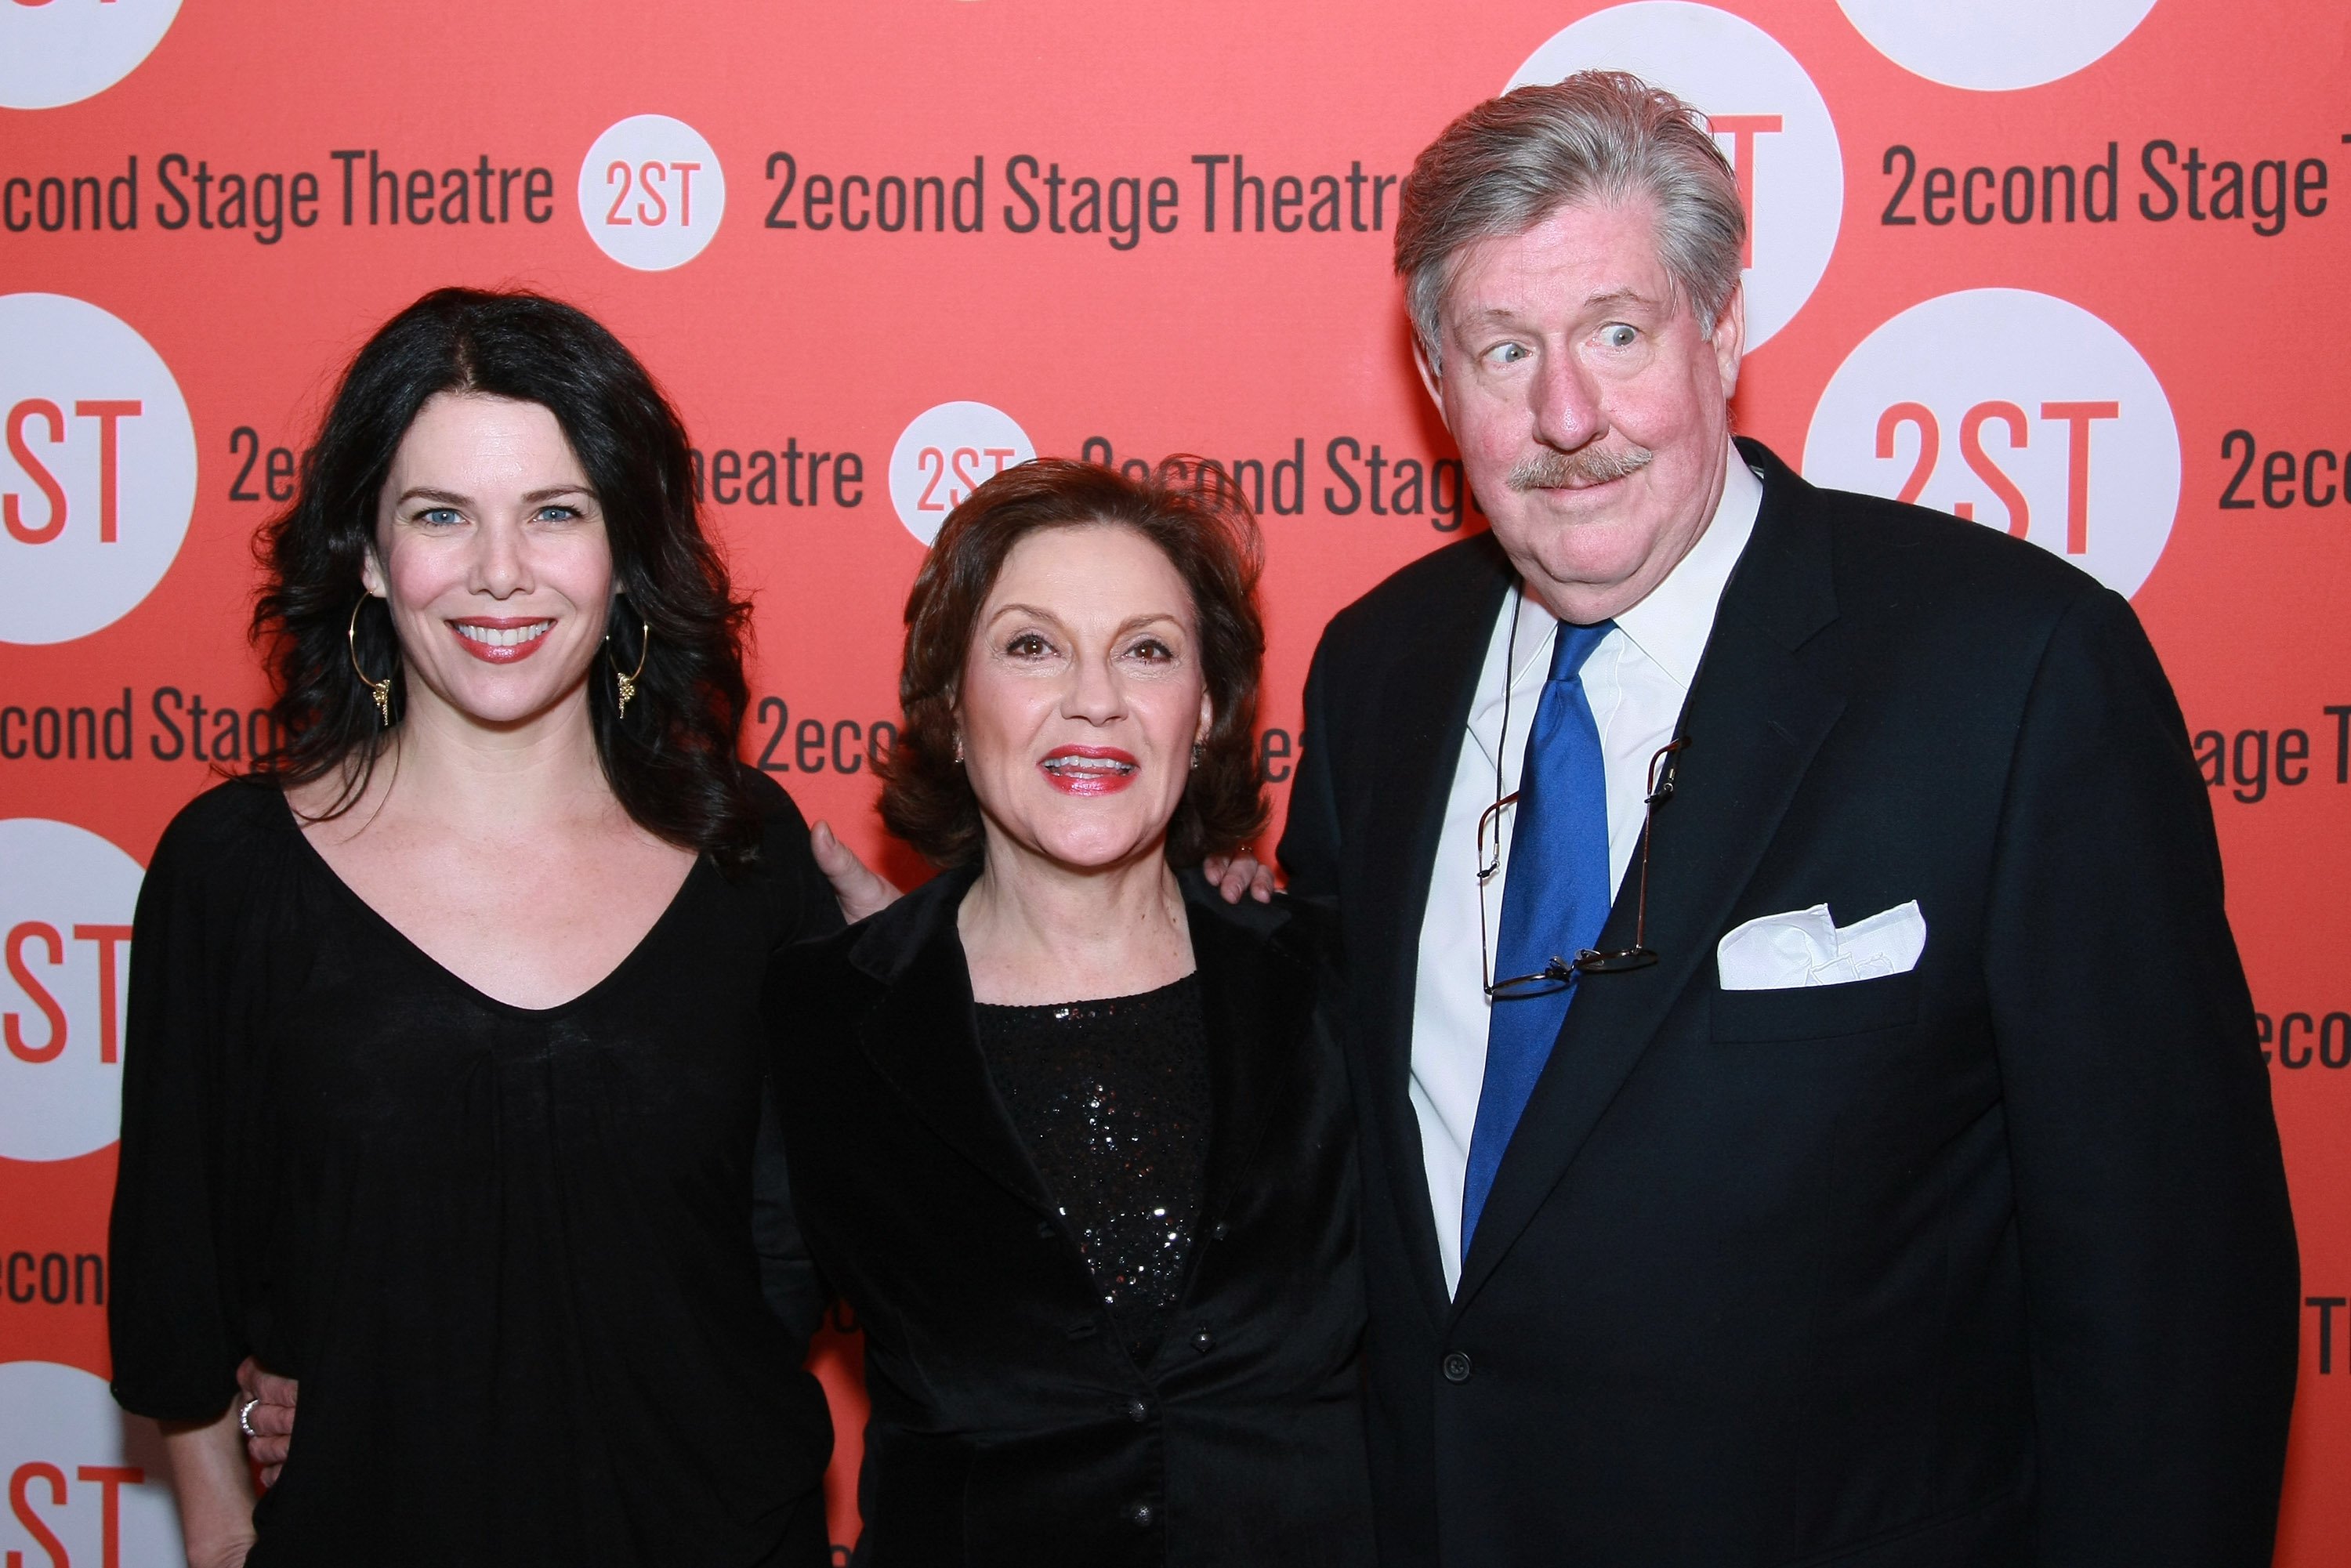 Lauren Graham, Kelly Bishop and Edward Herrmann attend the opening night after party for "Becky Shaw" at Spanky's on January 8, 2009 in New York City. Graham, Bishop and Herrmann appeared together in 'Gilmore Girls' as Lorelai Gilmore and Emily and Richard Gilmore